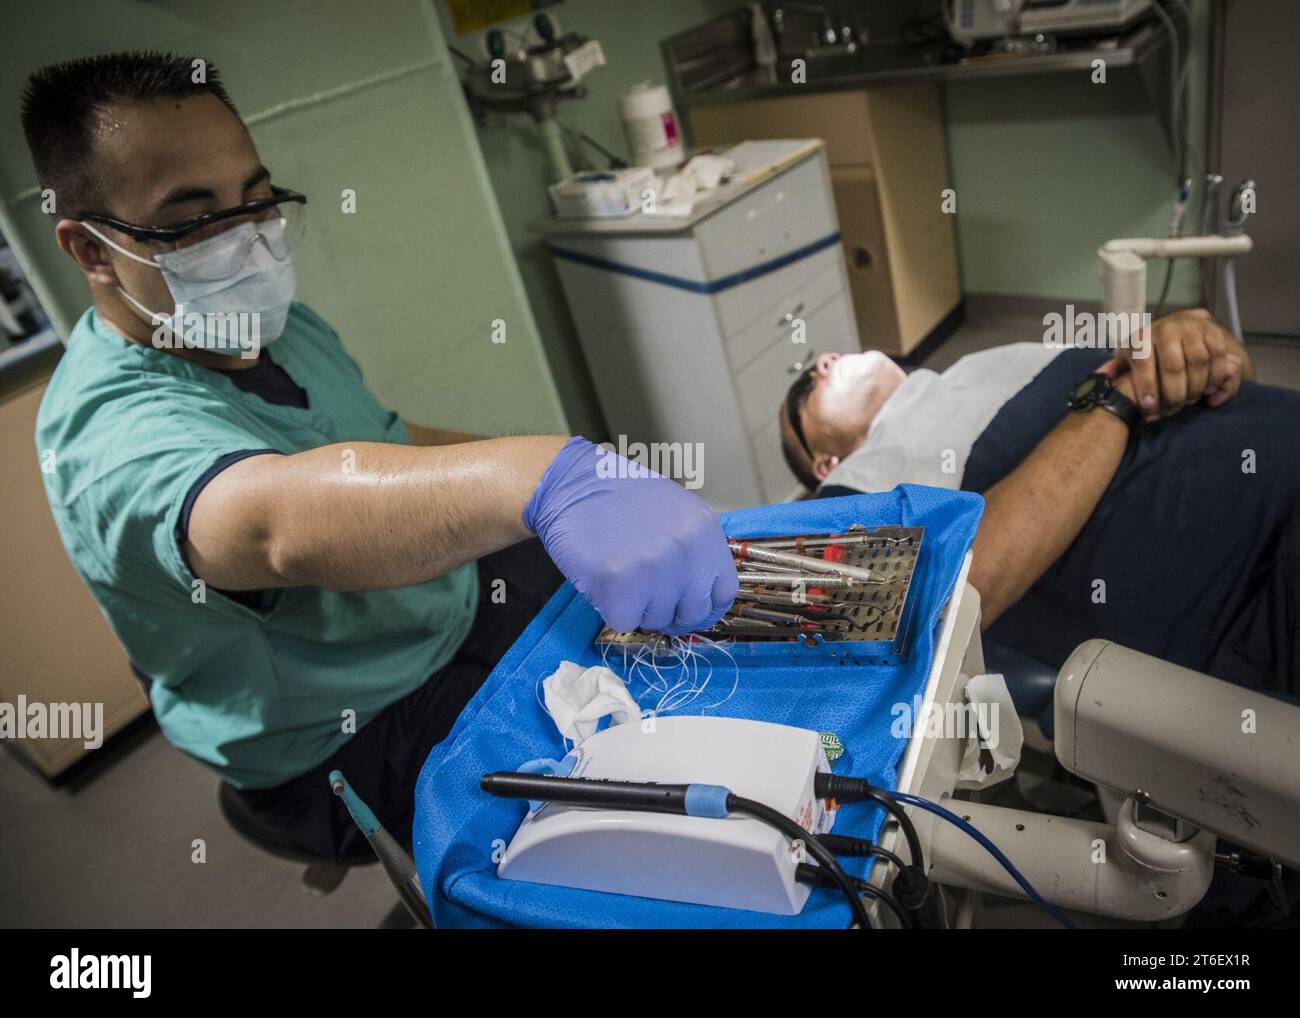 USS New Orleans Dental Cleaning (27167553955) Stock Photo